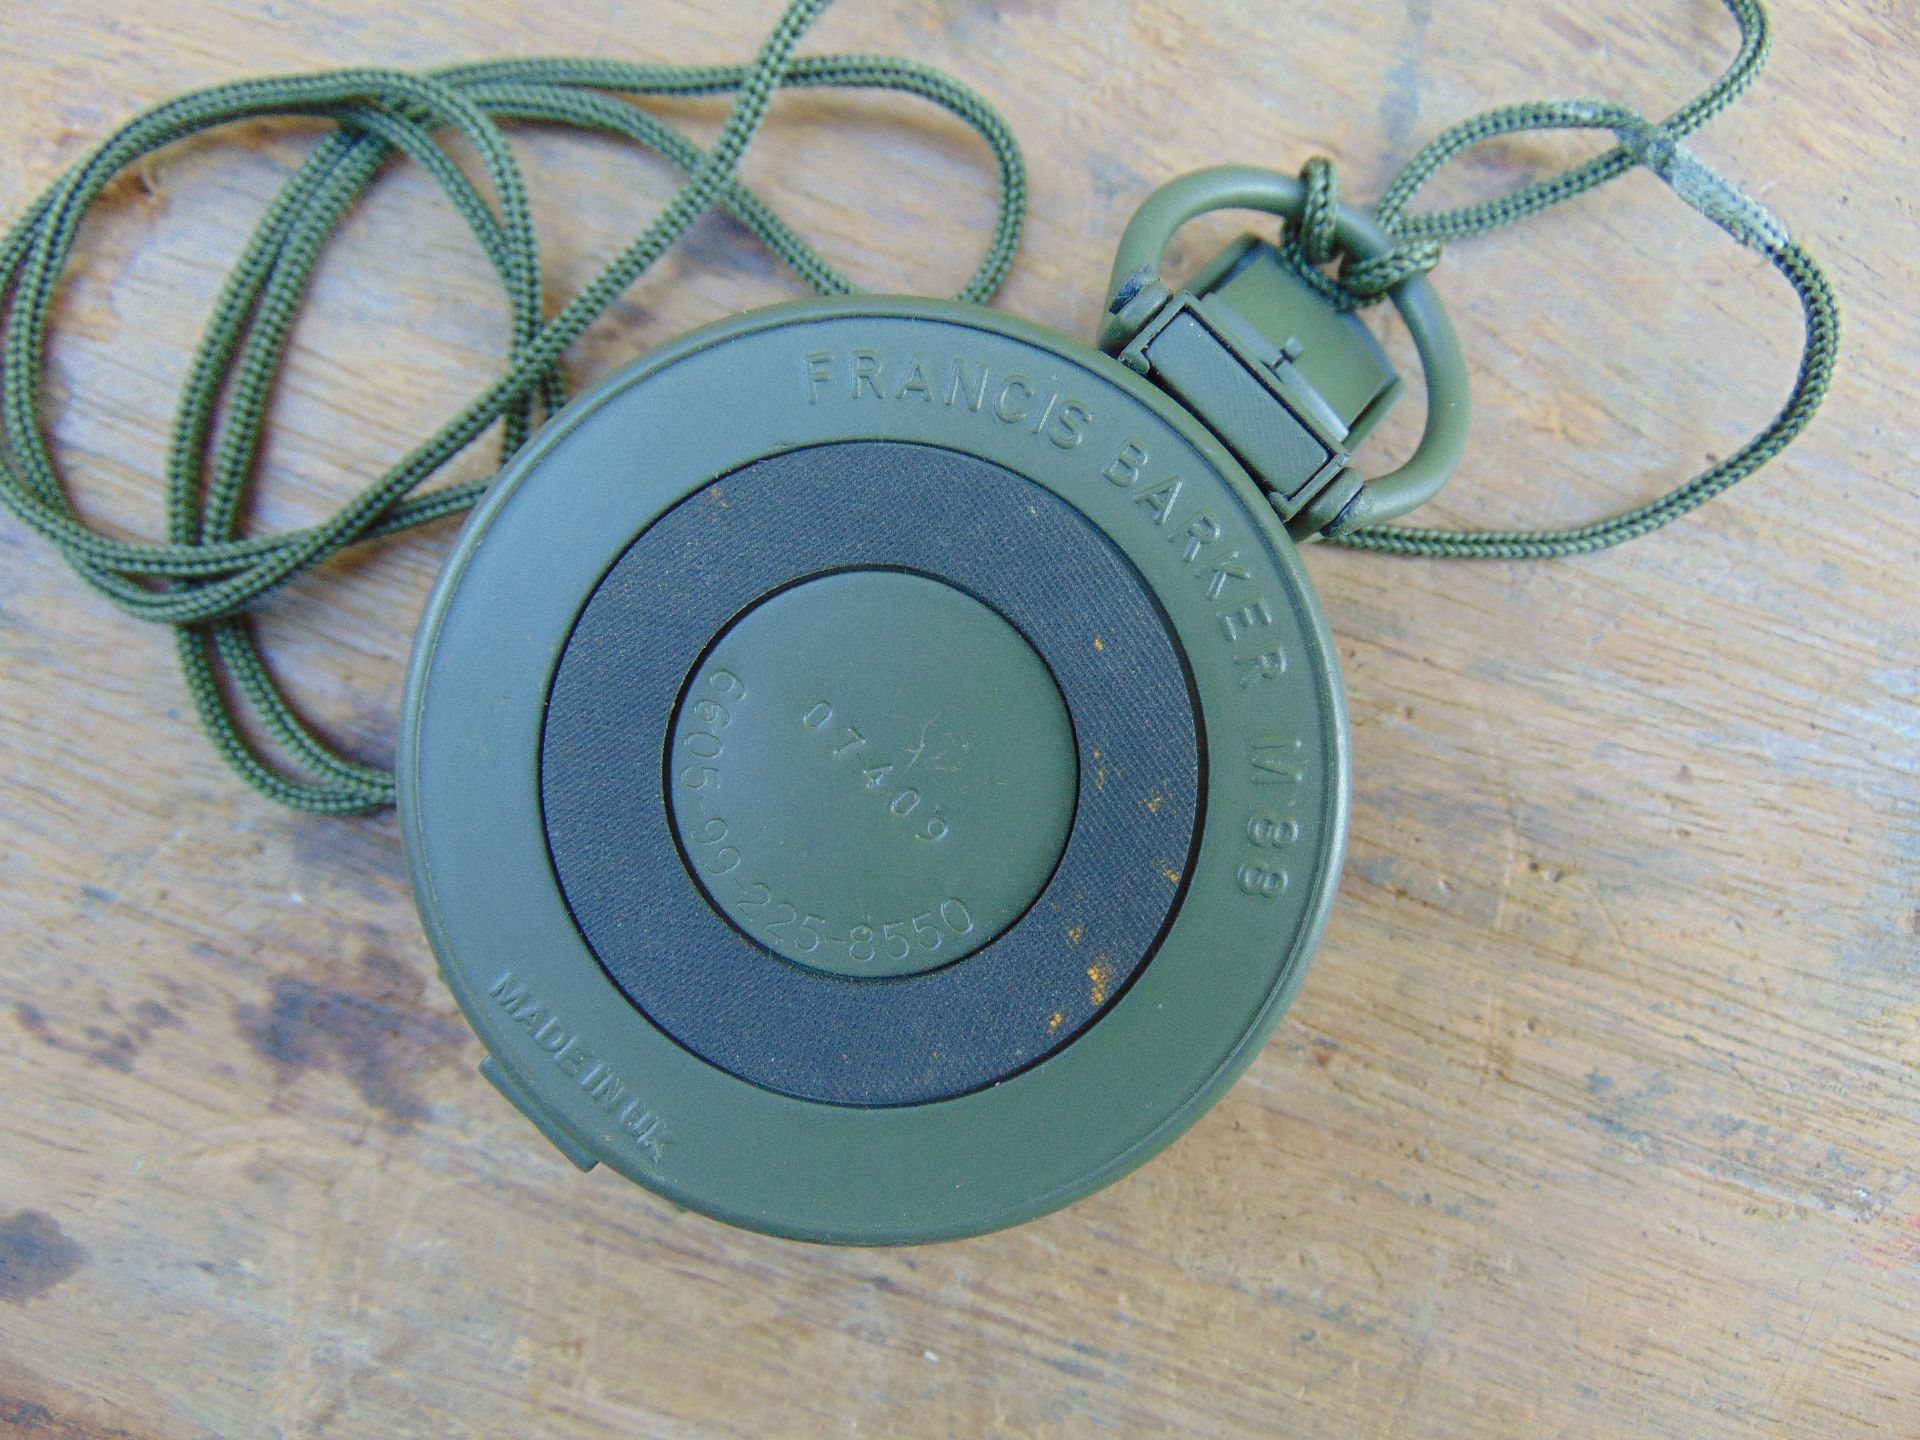 Genuine British Army Francis Barker M88 Marching Compass - Image 4 of 4